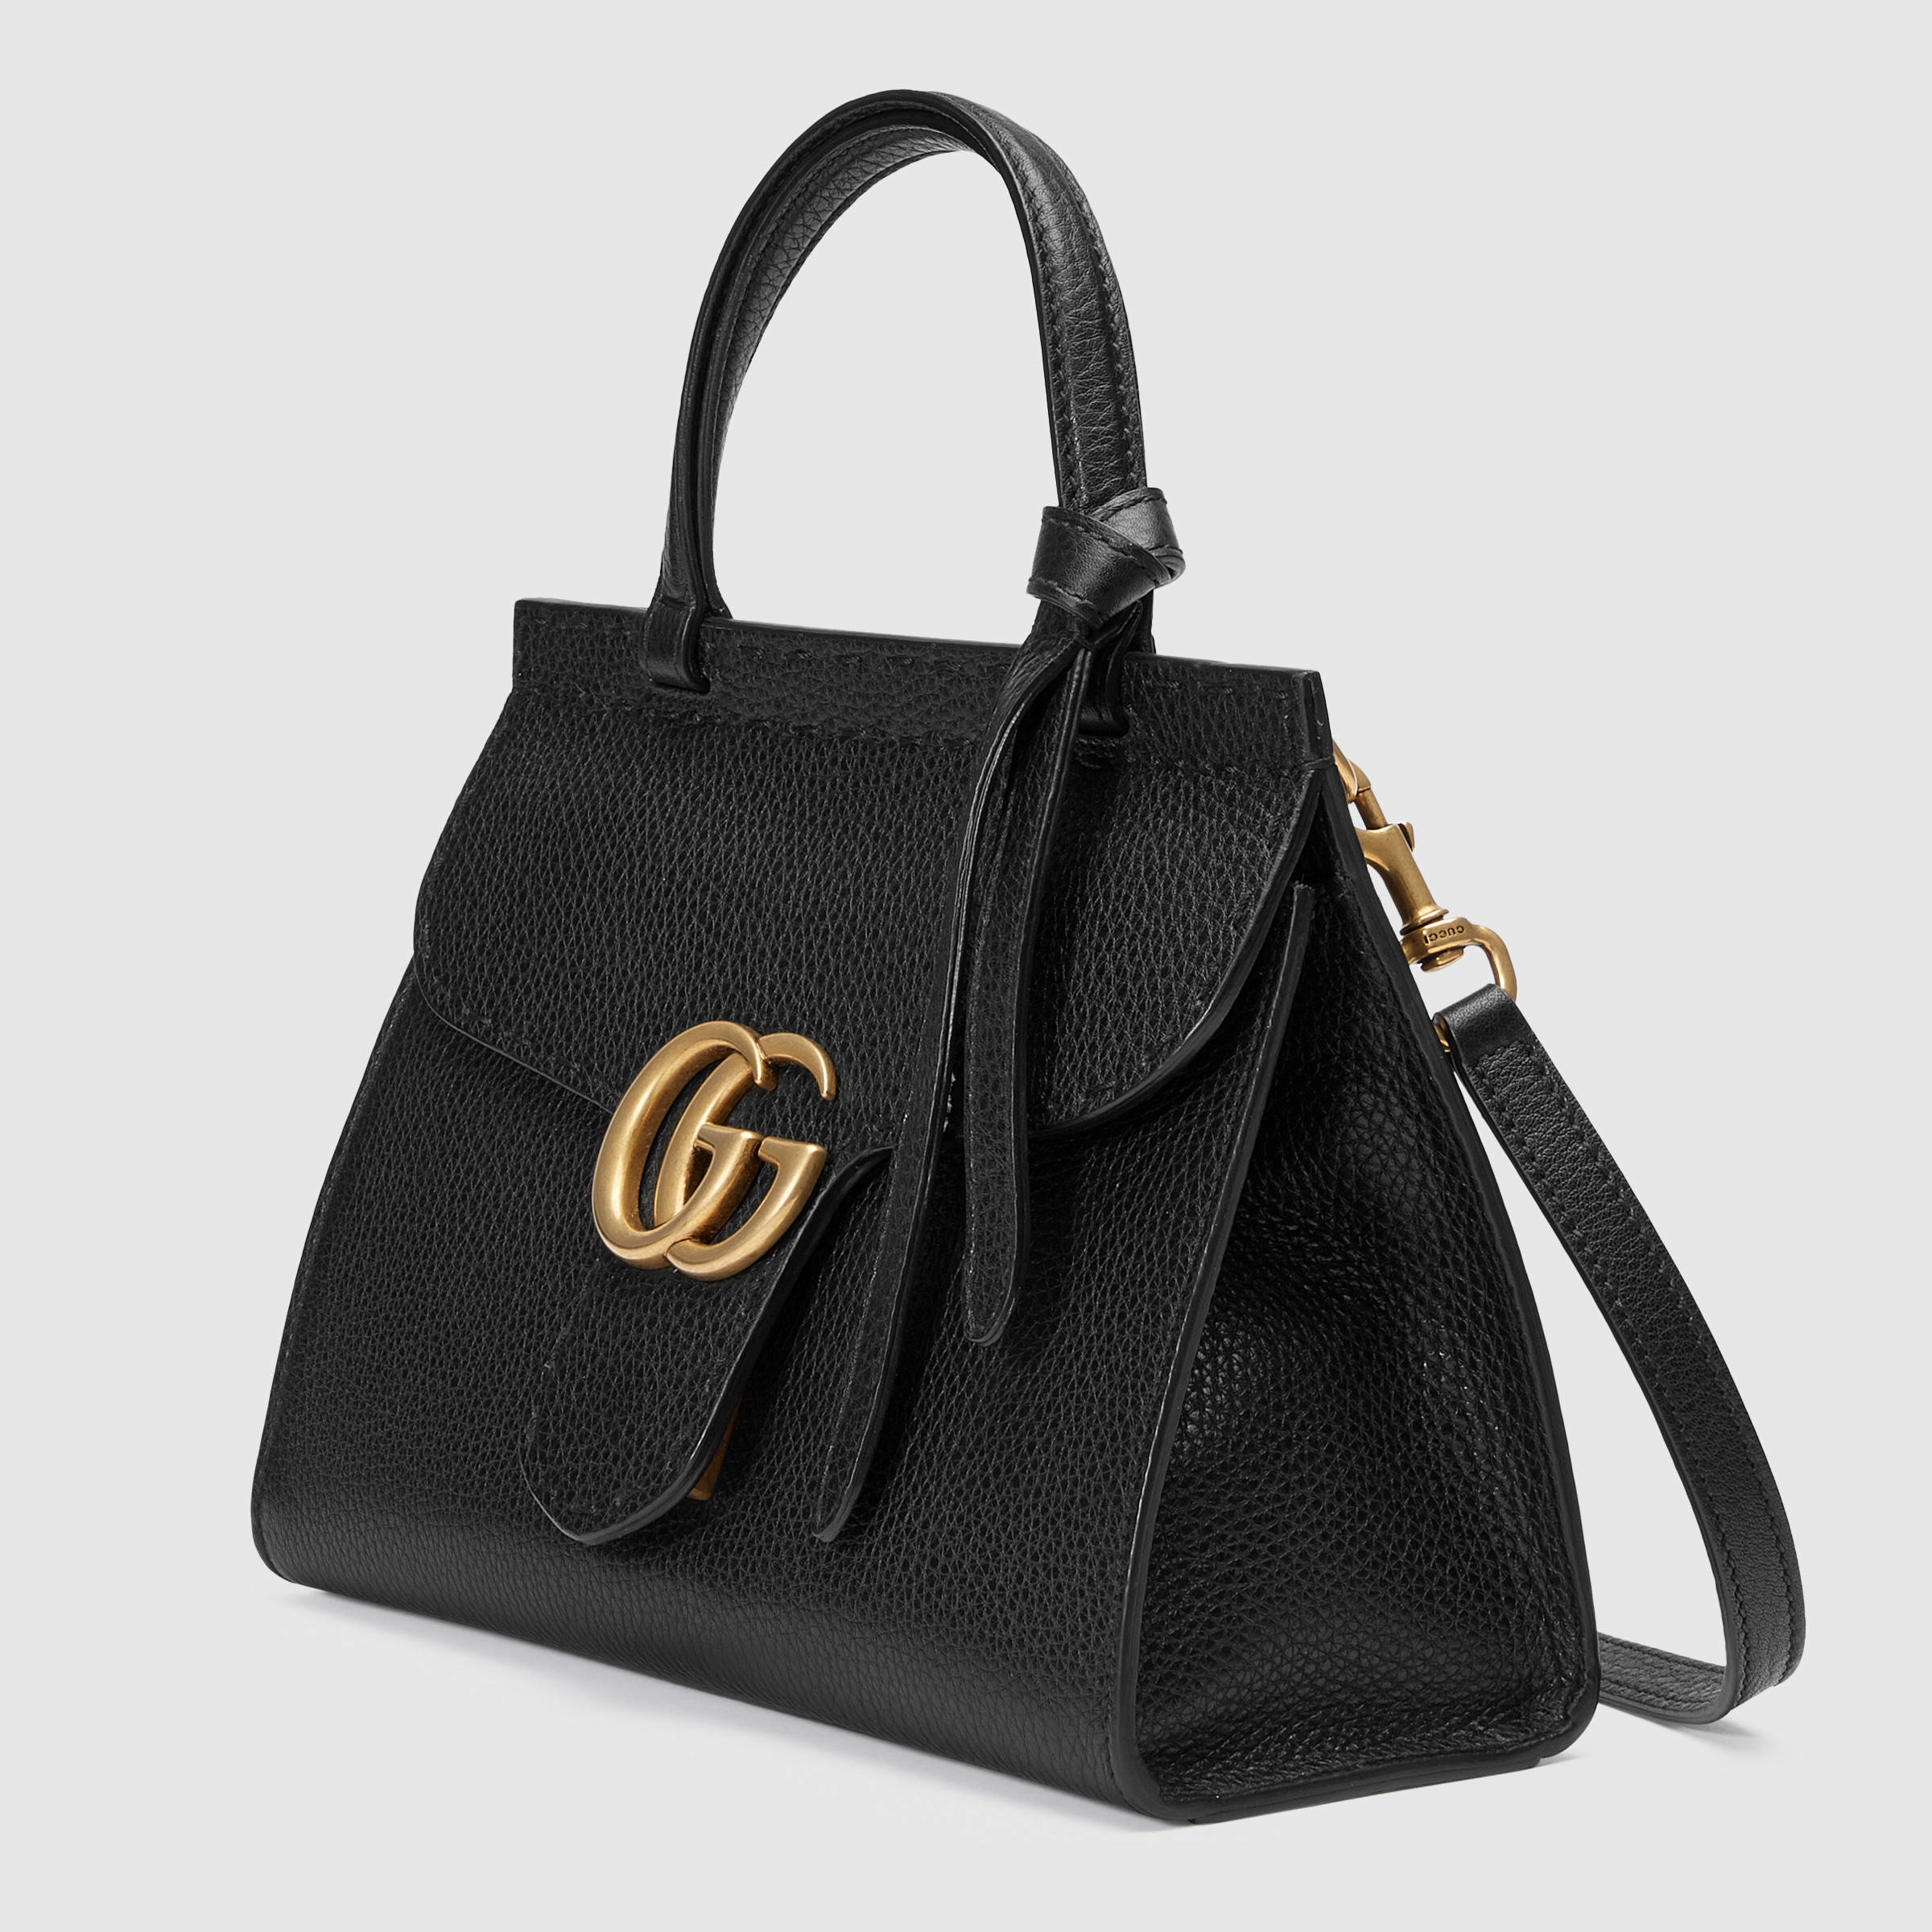 Lyst - Gucci GG Marmont Leather Mini Leather Top-Handle Bag in Black